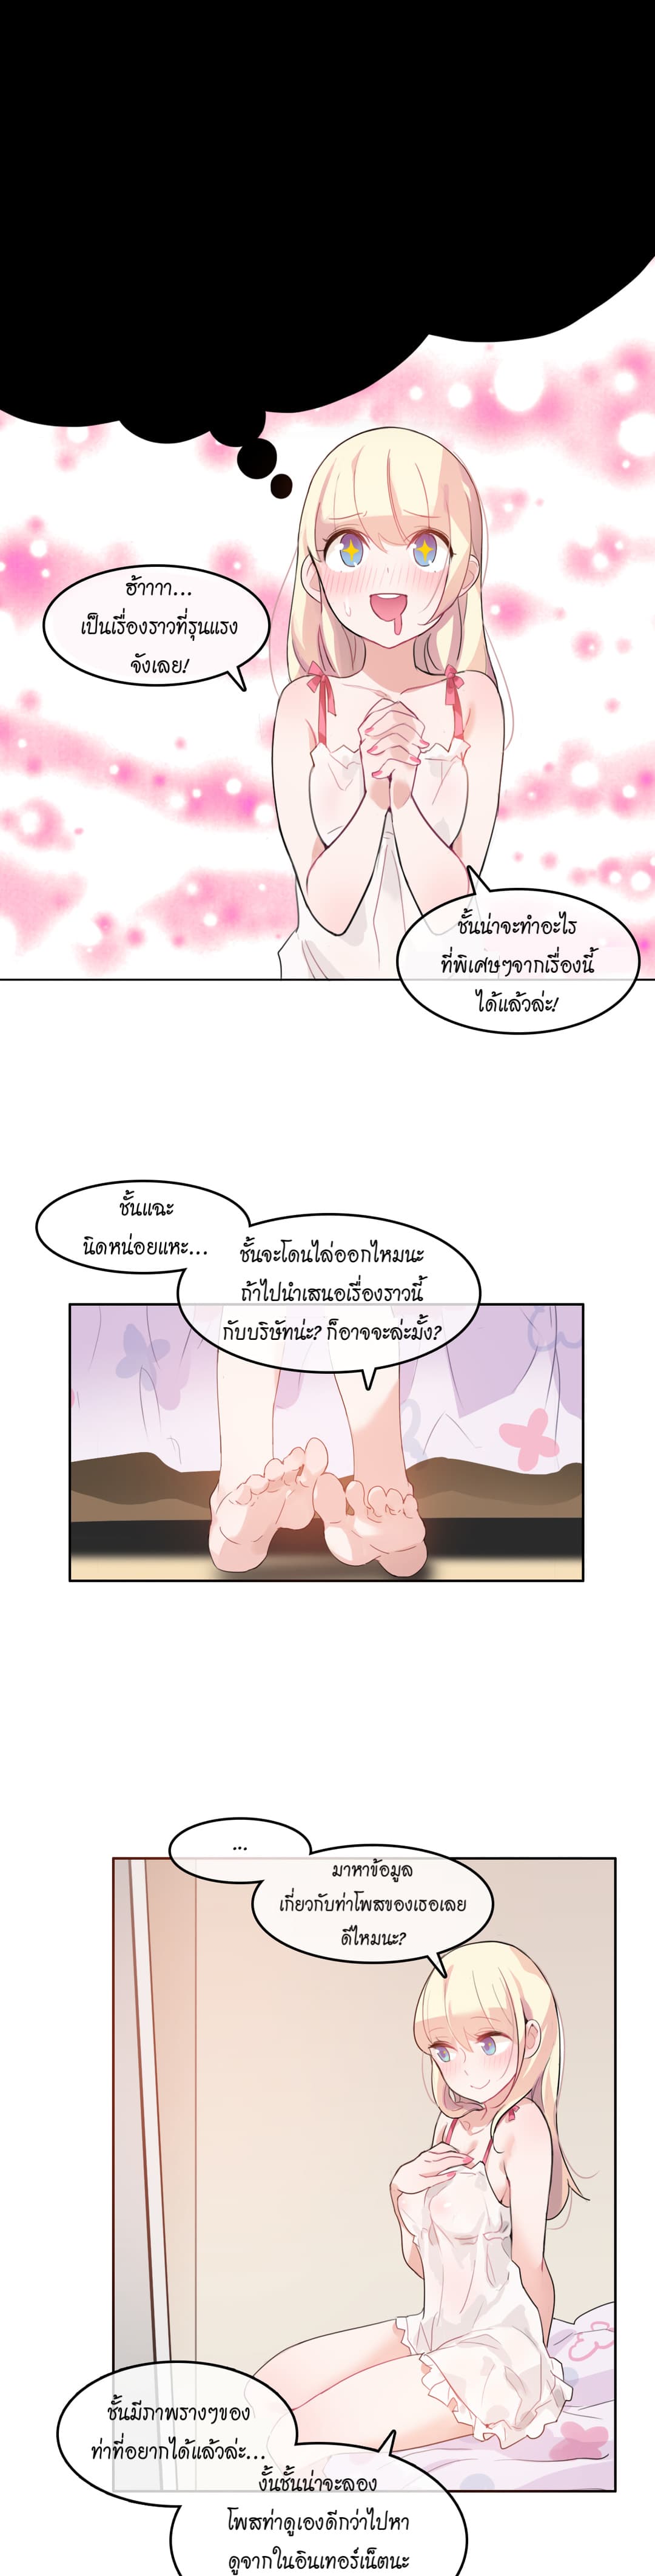 A Pervert’s Daily Life 6 (19)